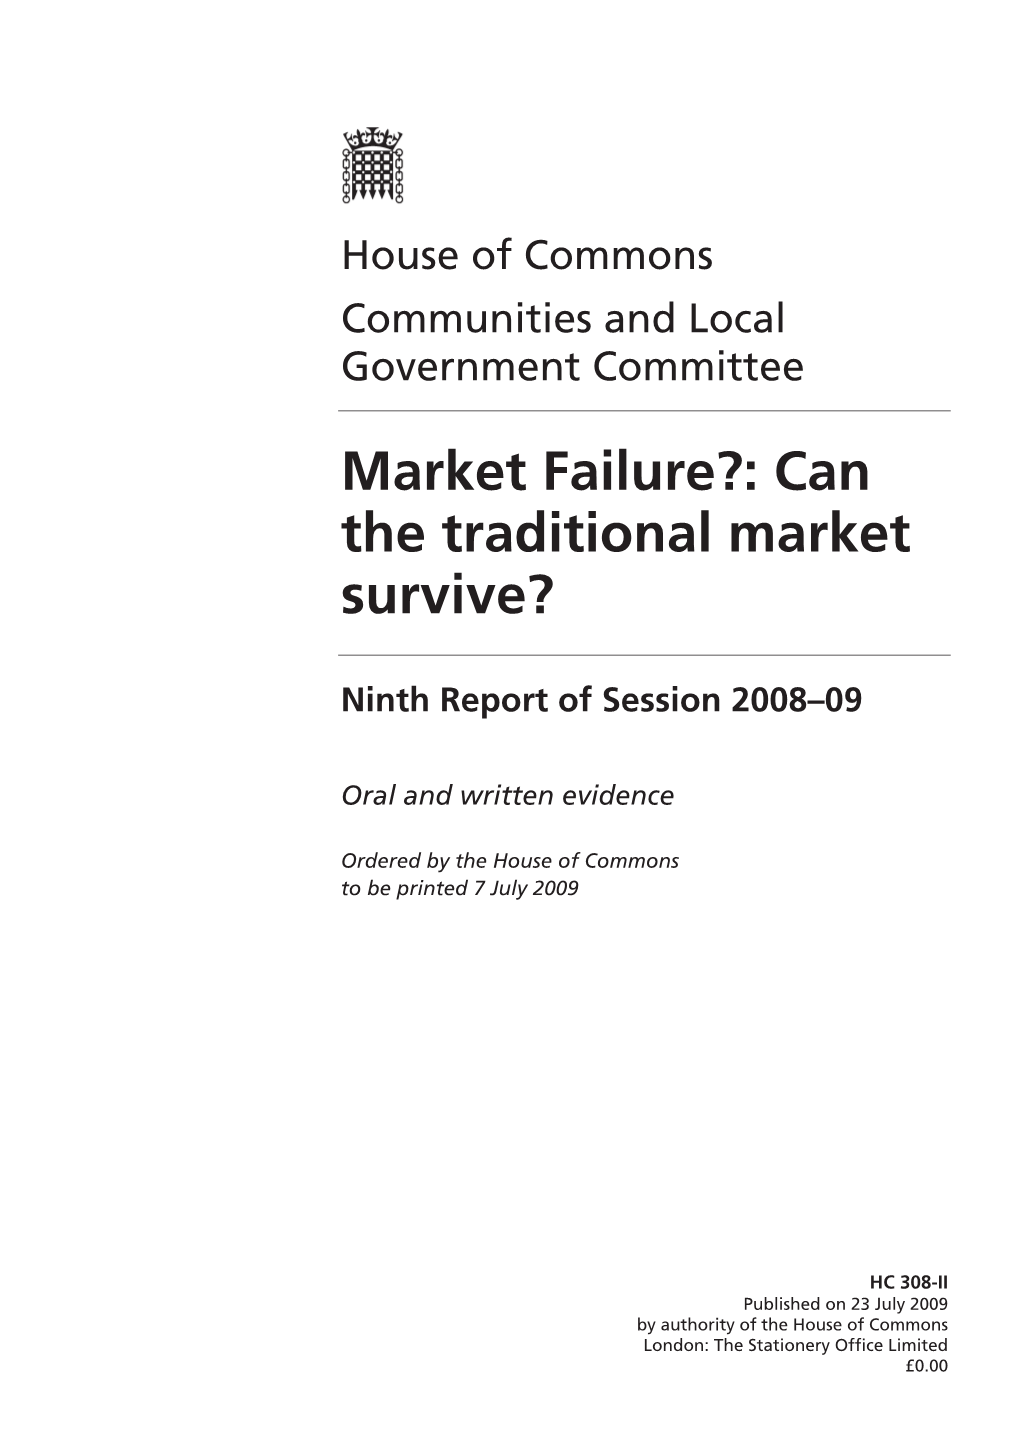 Market Failure?: Can the Traditional Market Survive?